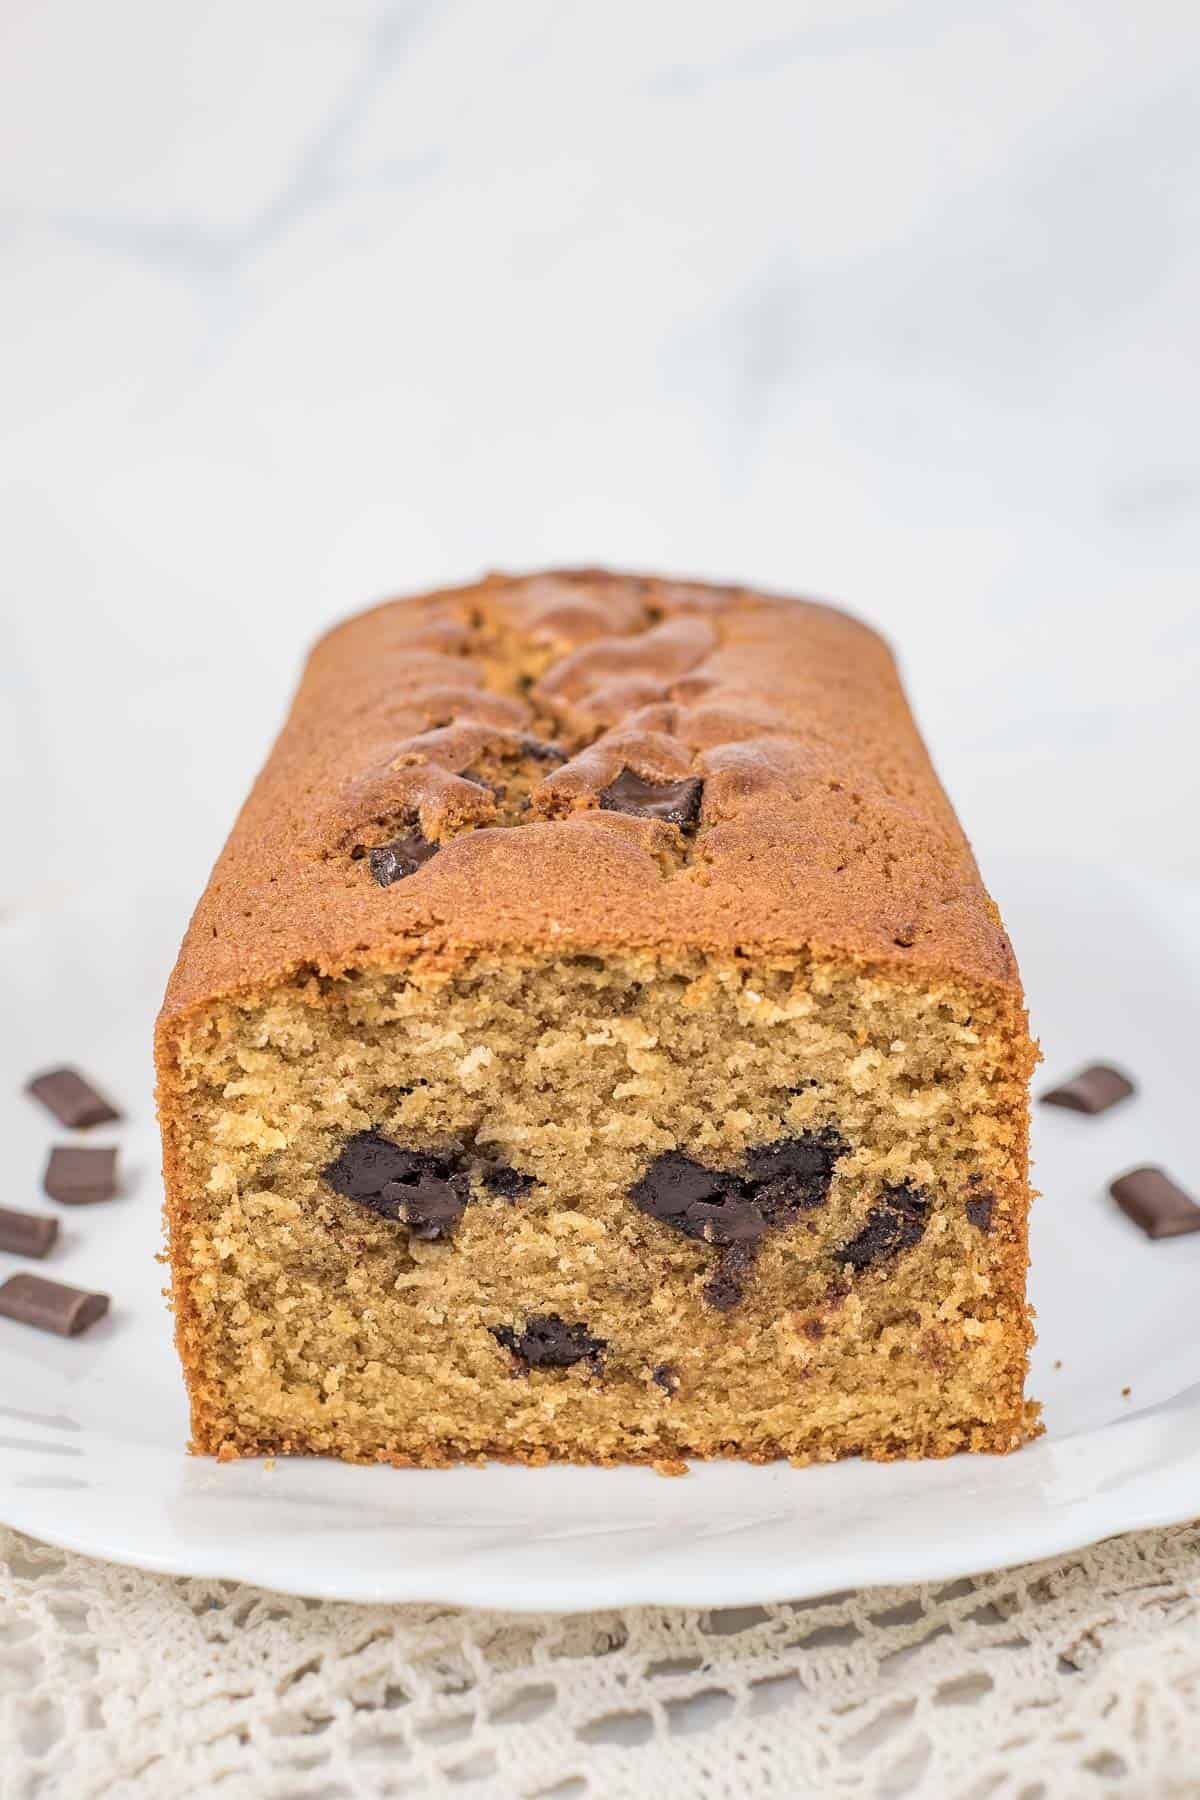 The front view of an instant coffee cake with a slice cut out.